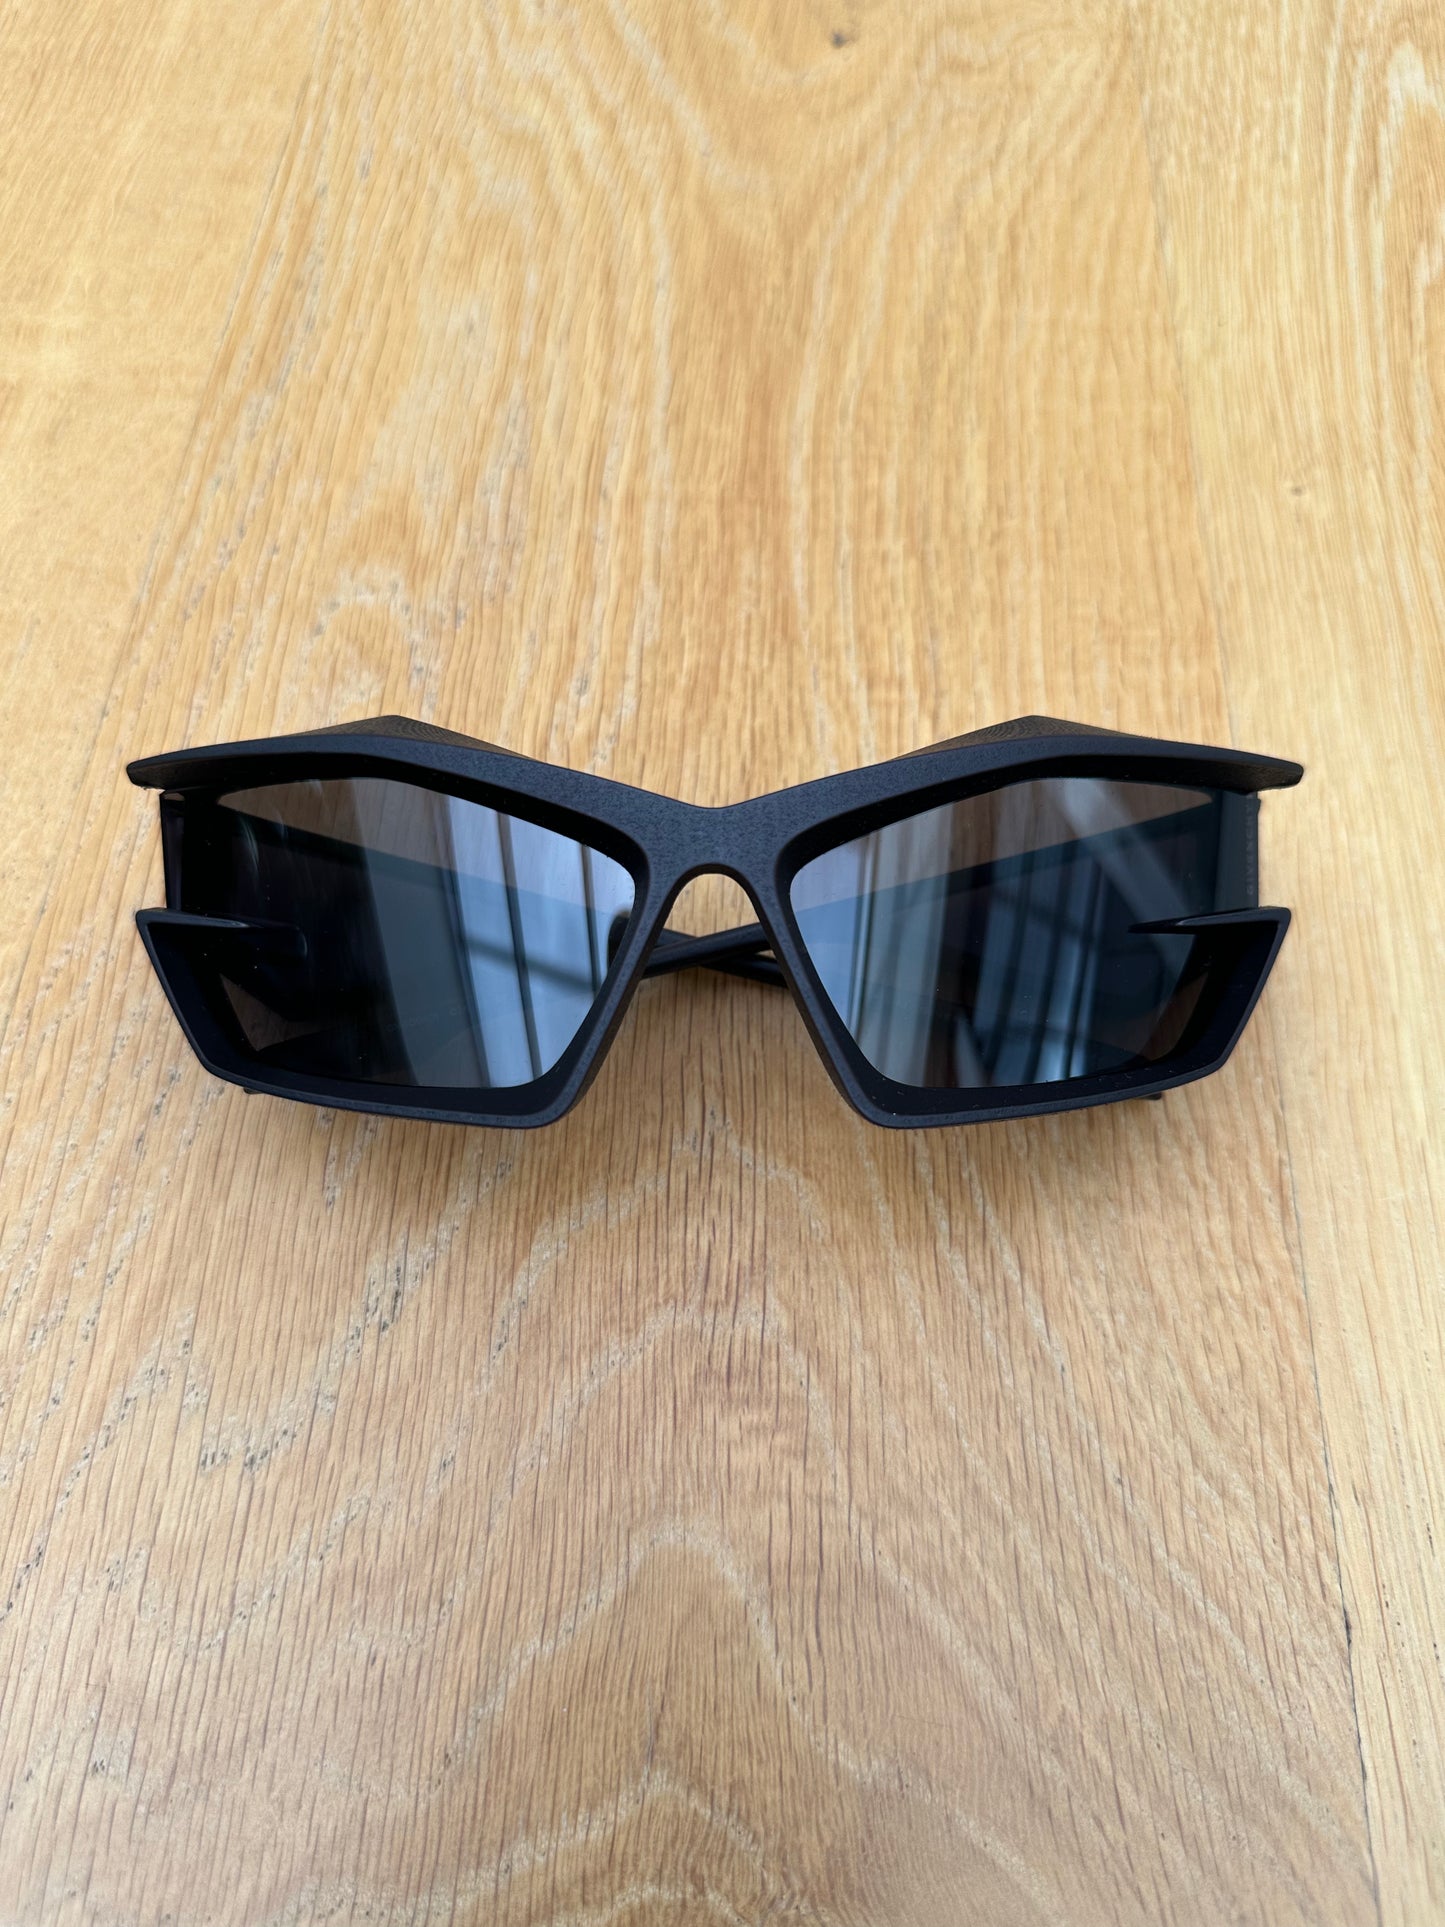 GIVENCHY cut out sunglasses